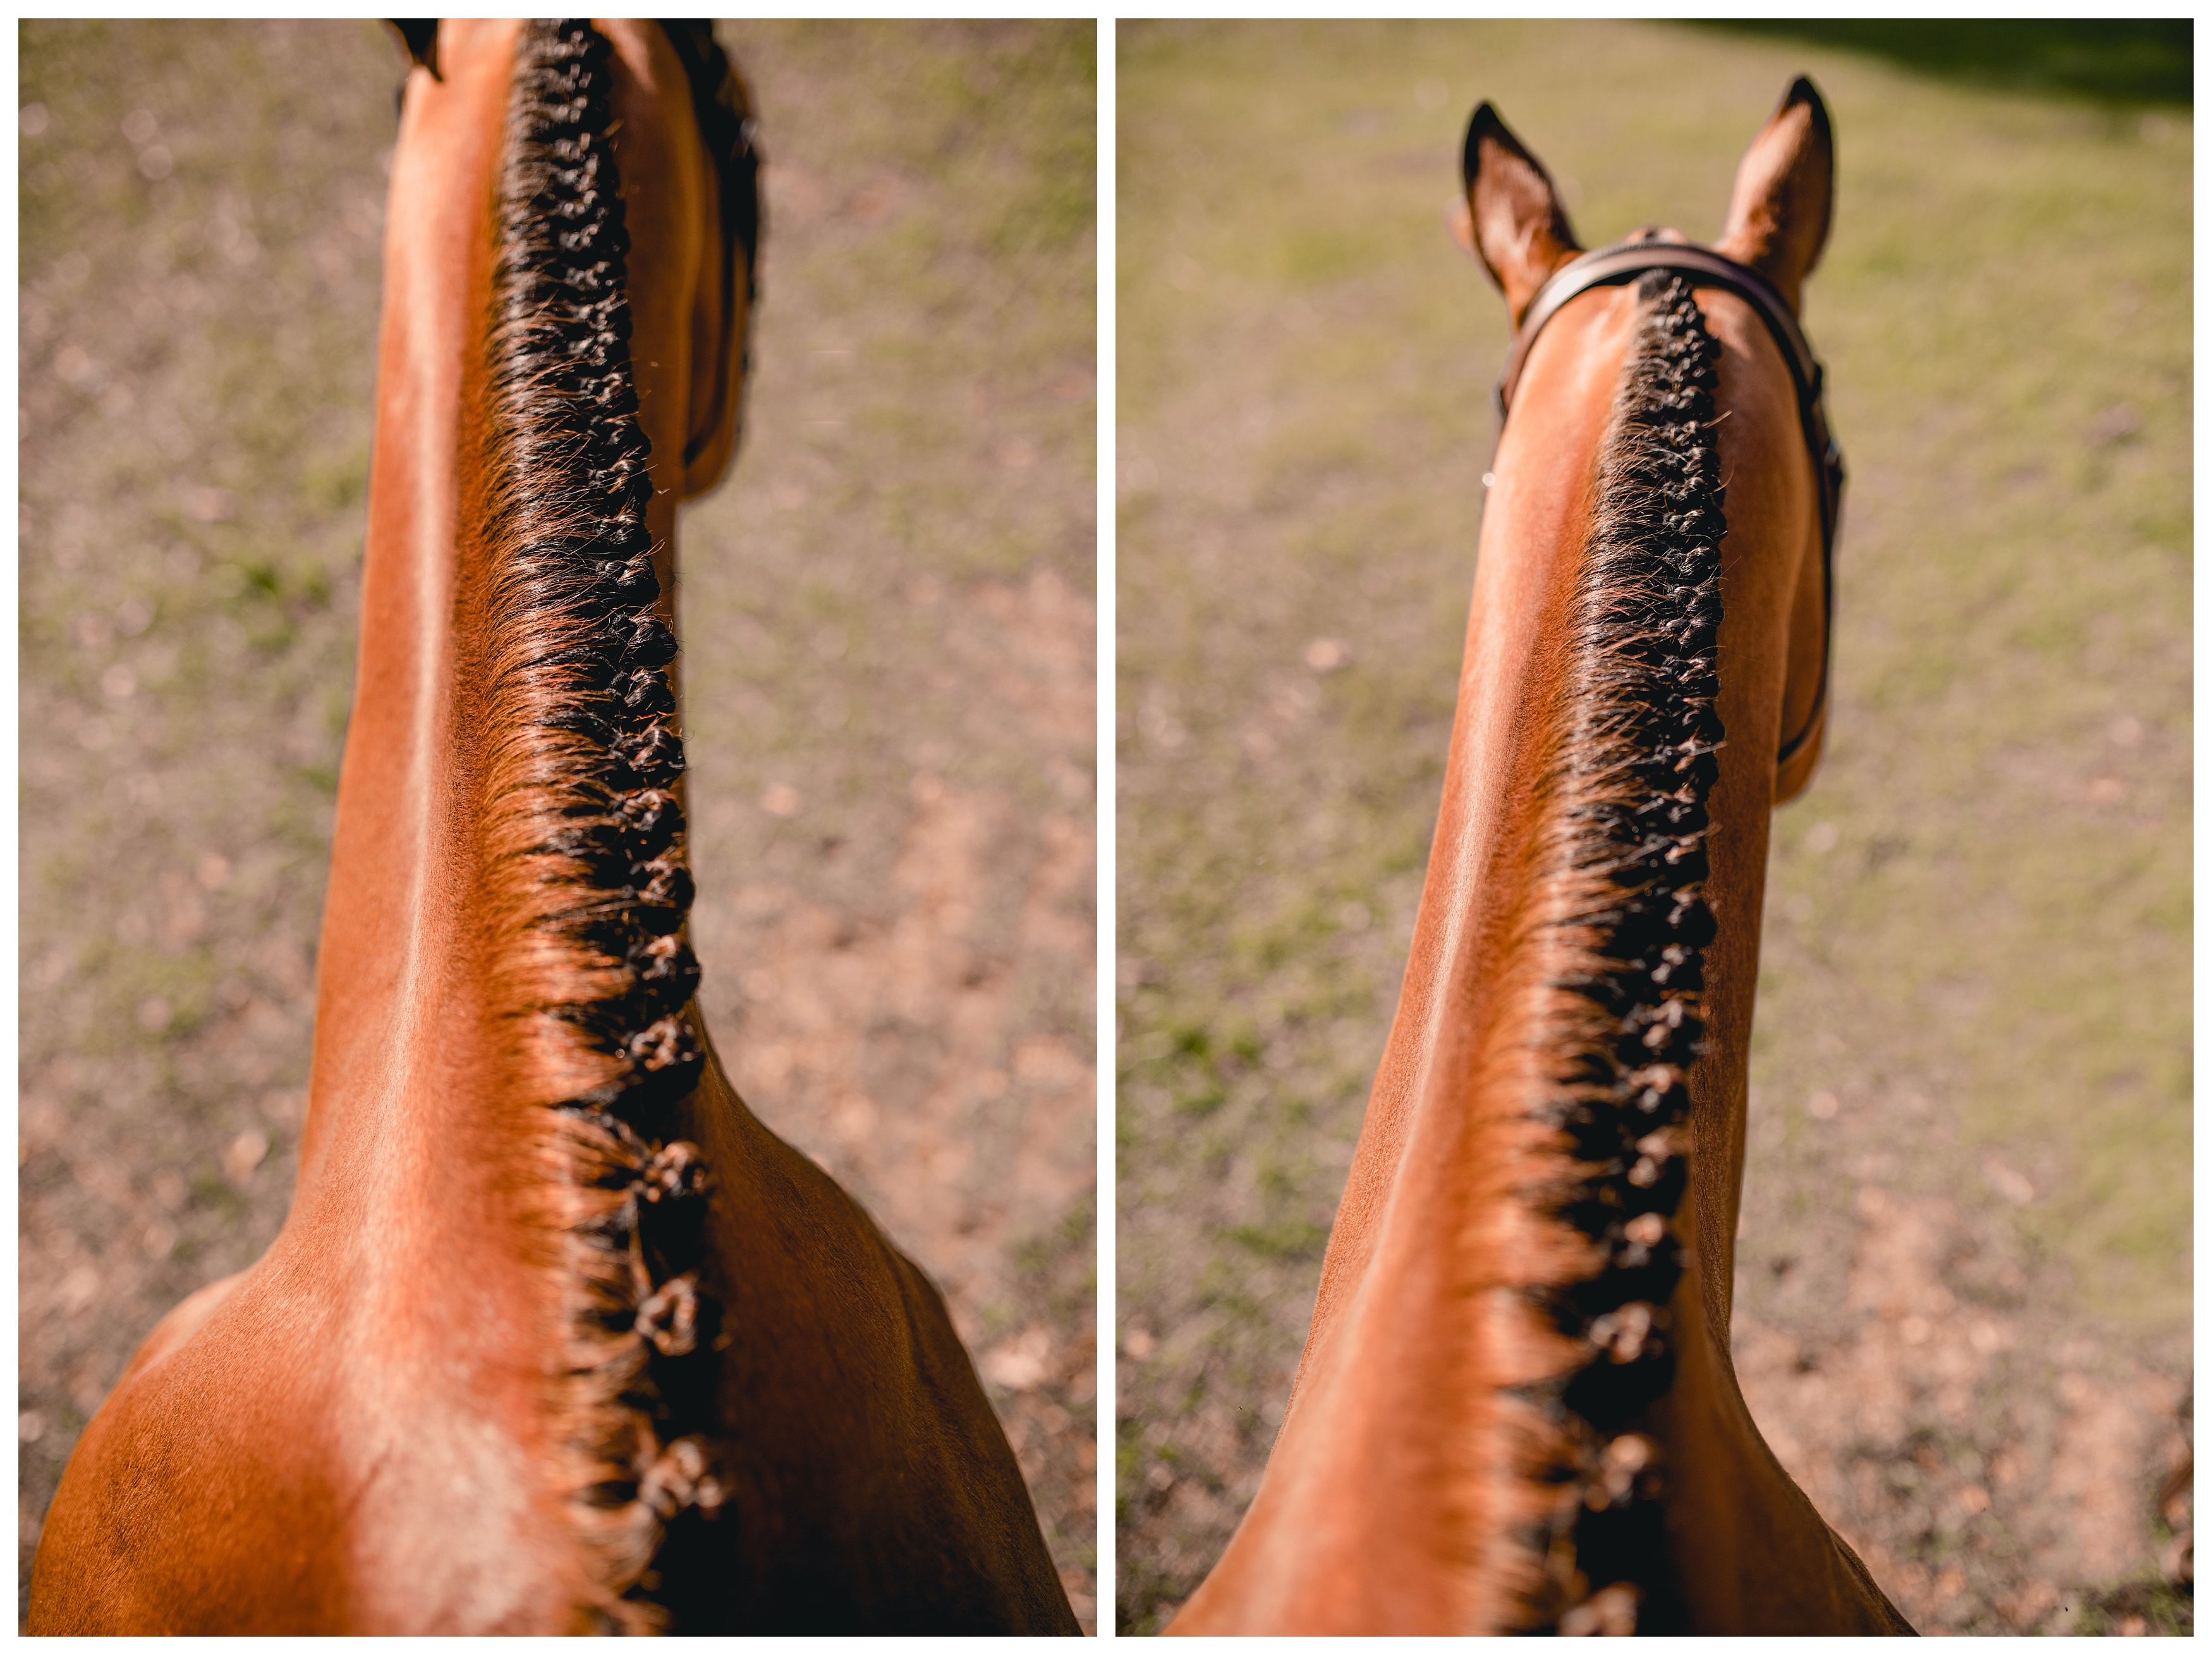 Unique angle of horse braids while on the horse by professional horse braider in Ocala, Florida. Shelly Williams Photography